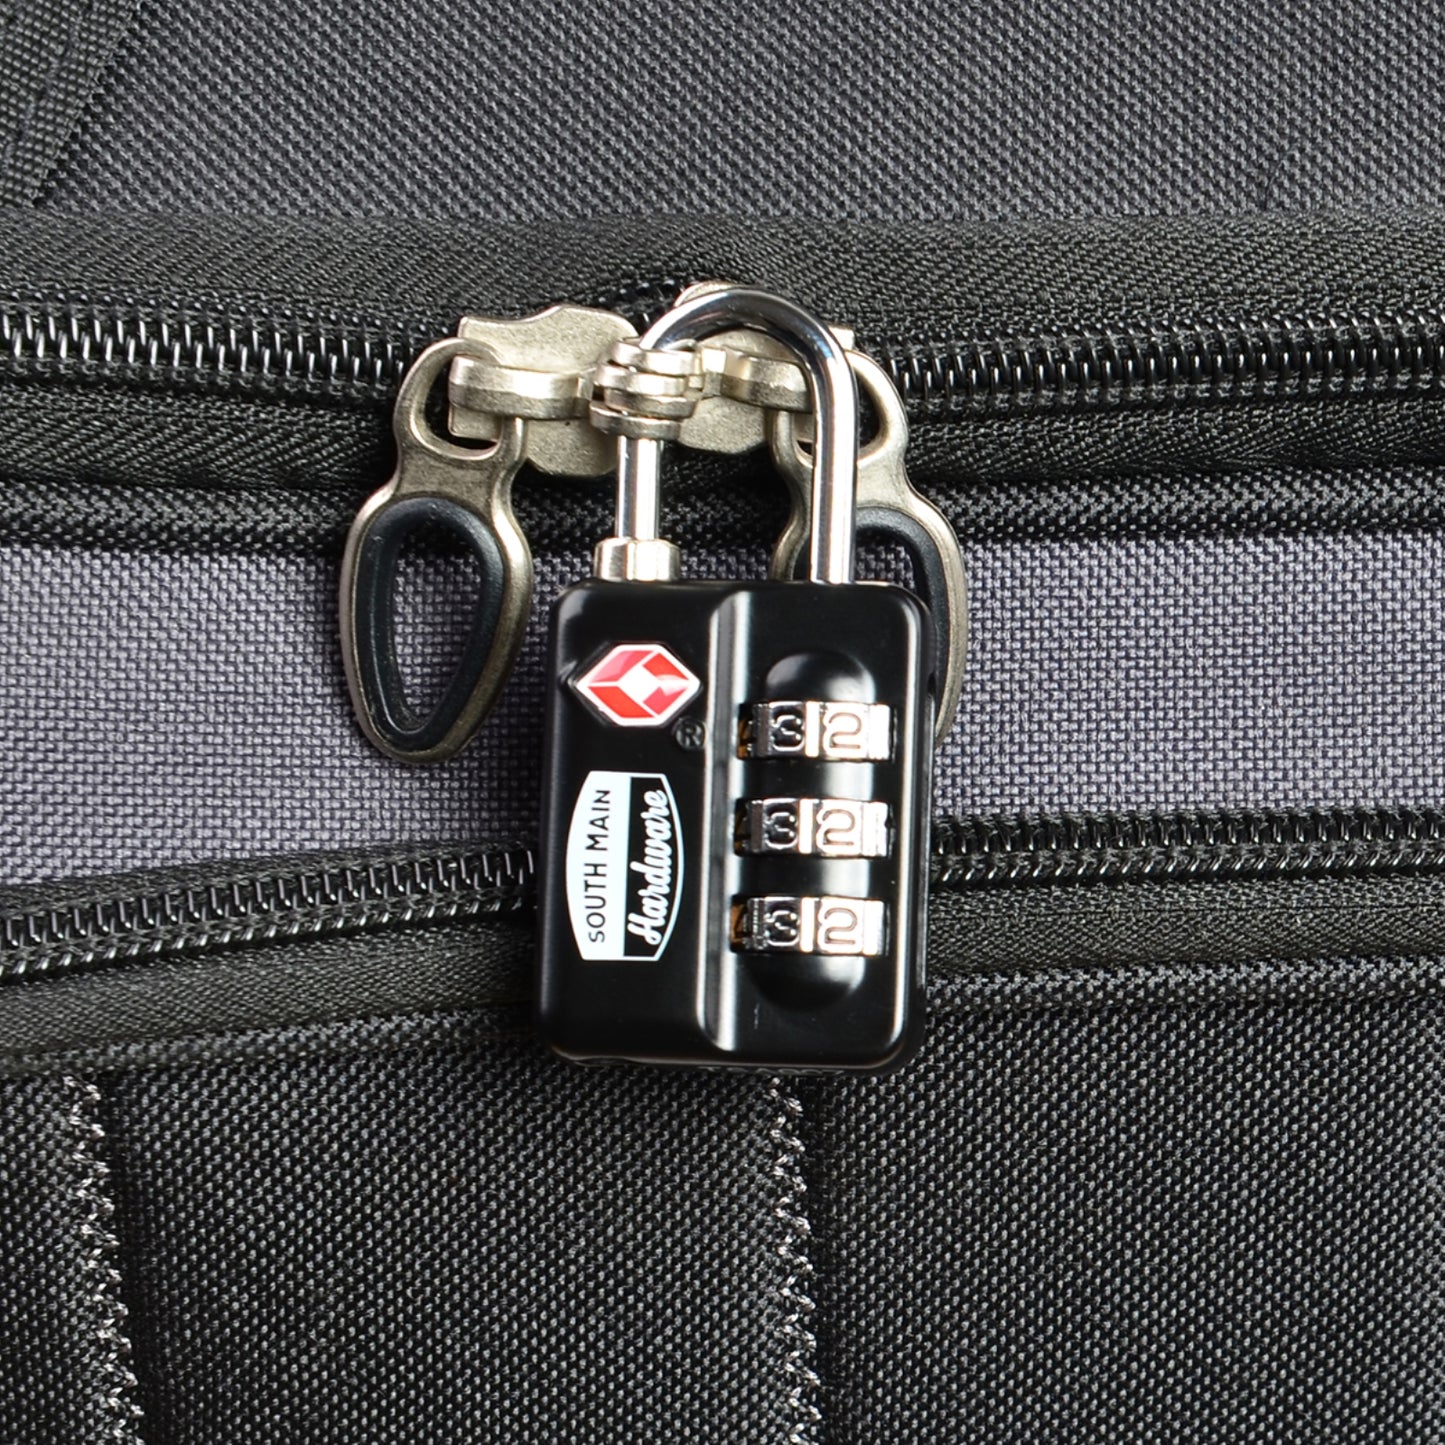 South Main Hardware TSA-Accepted Resettable Luggage Lock, Black. 1-Pack